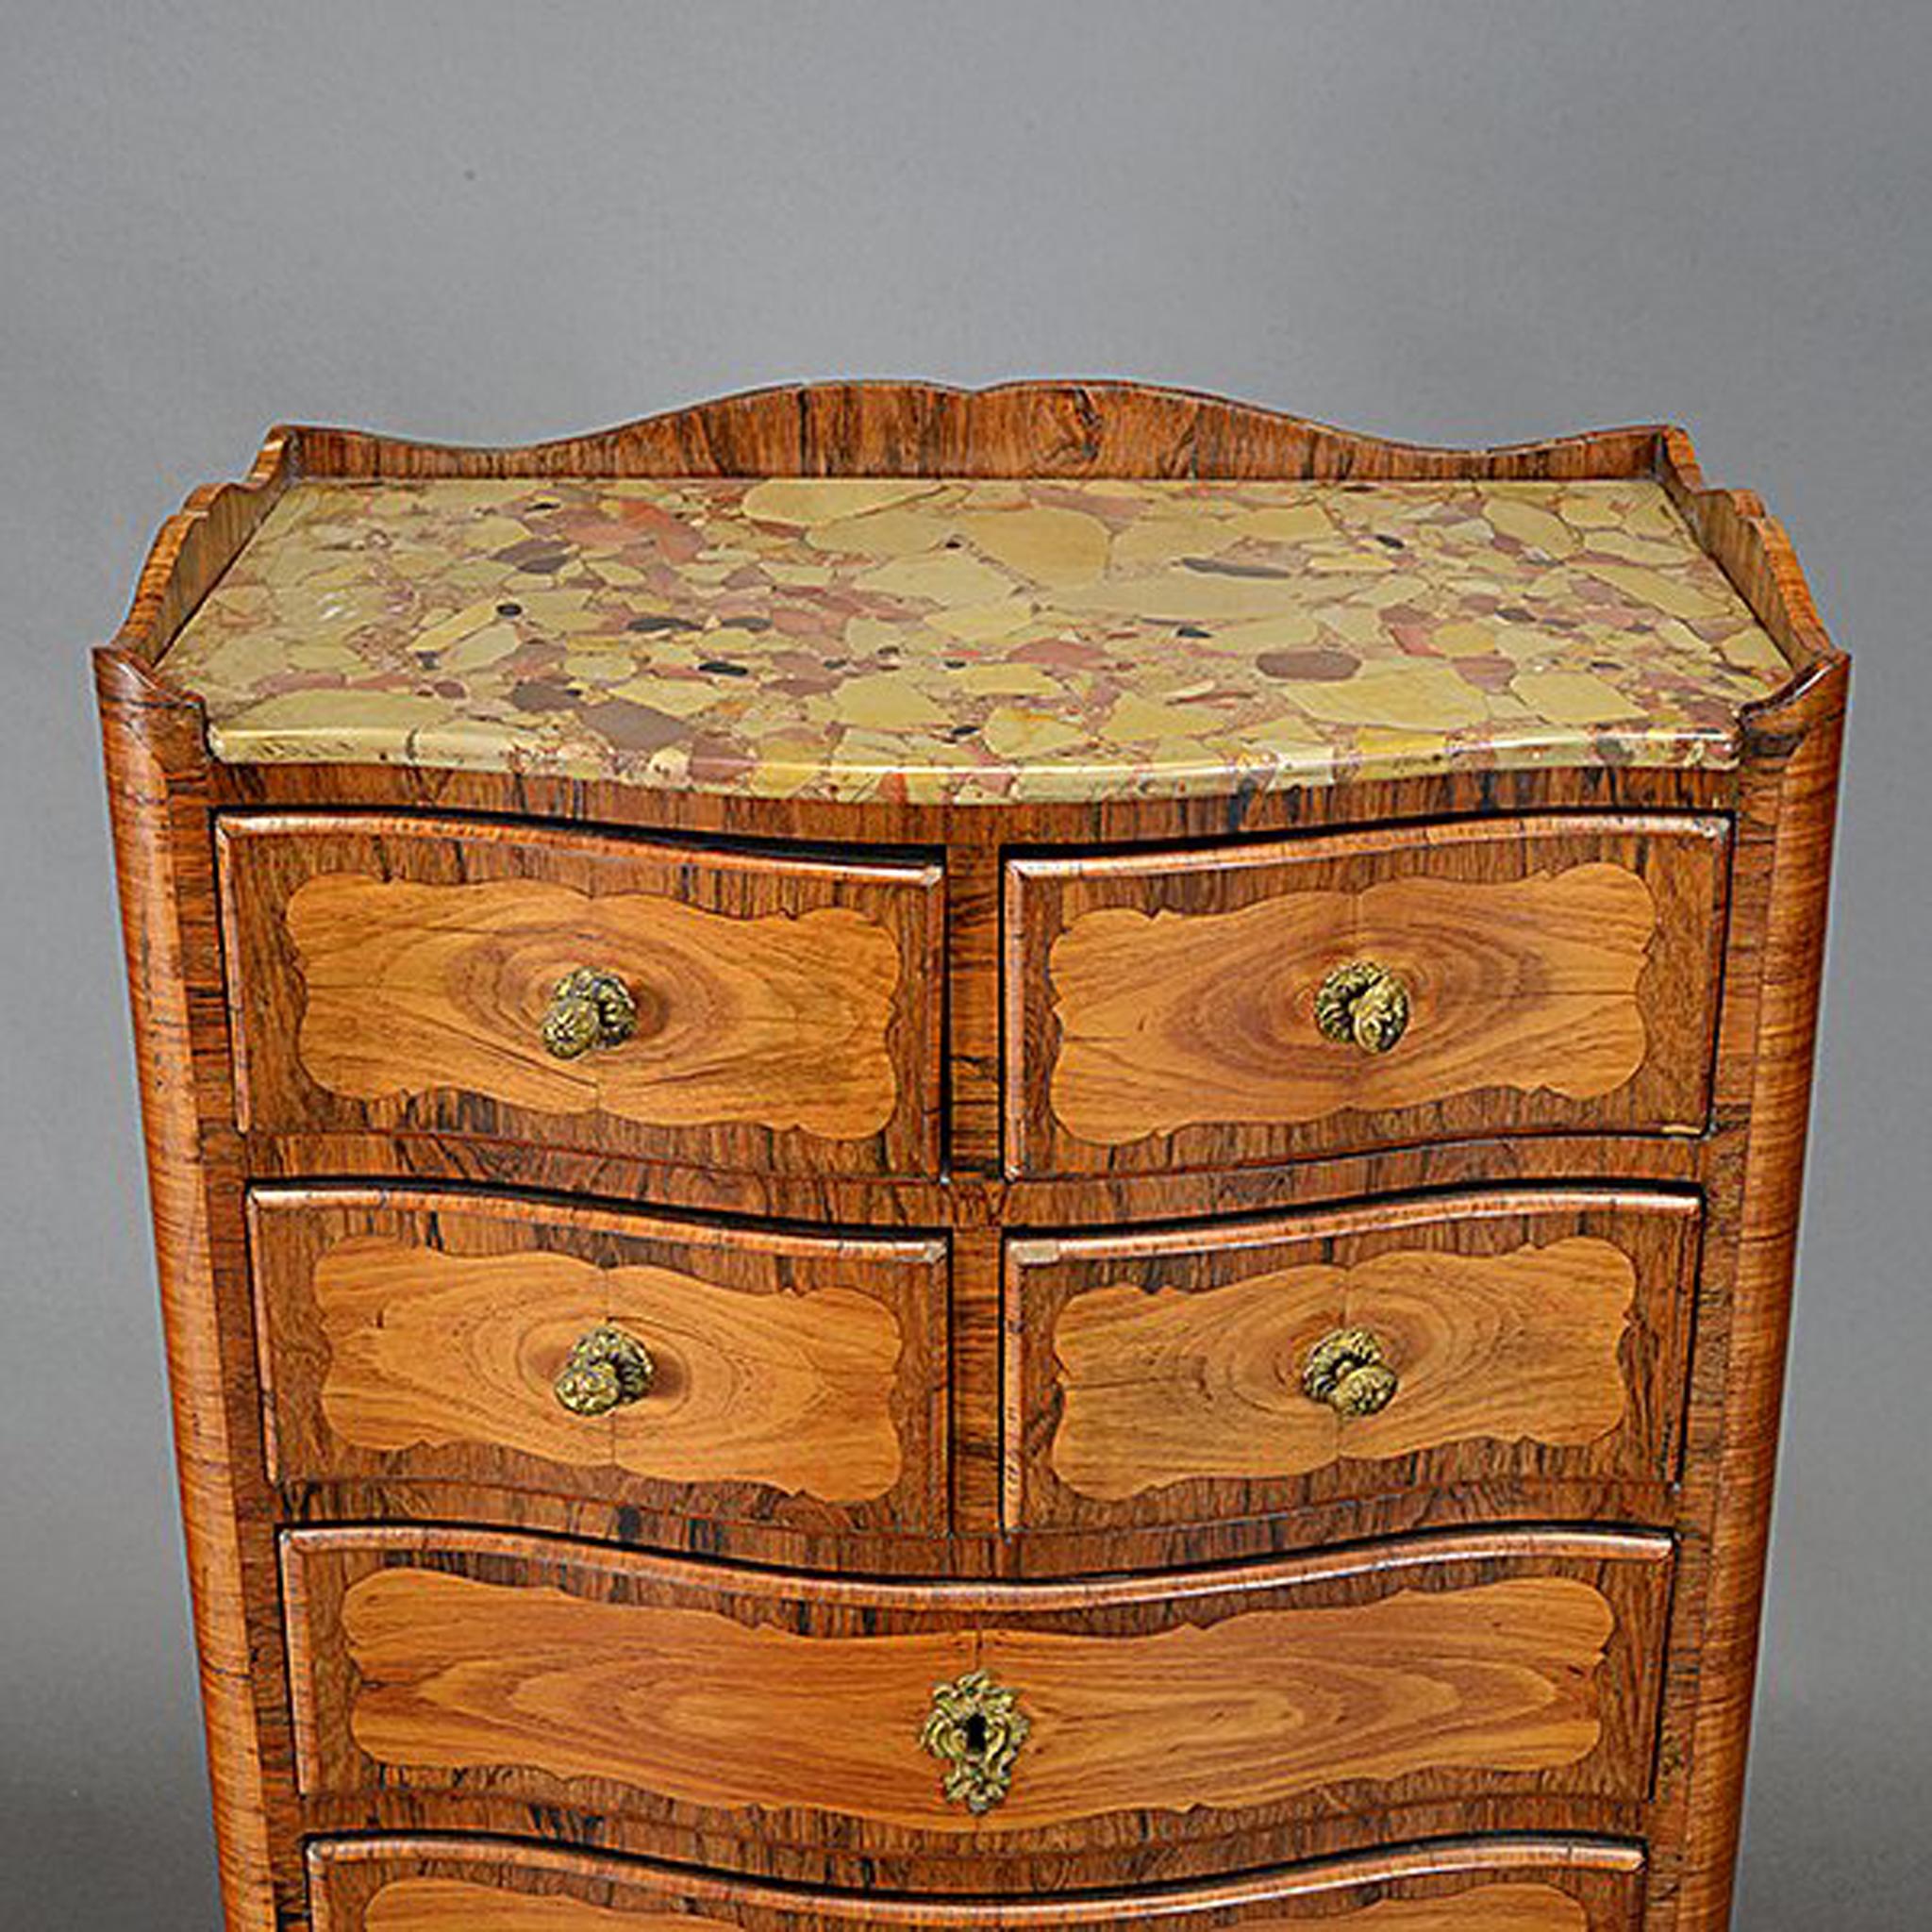 Attractive pair of 19th century French Louis XV style tall semainier chests, 19th century.
The inset mottled marble top is over an inlaid tall chest semainier with four short drawers and five long drawers mounted with bronze pulls and escutcheons,